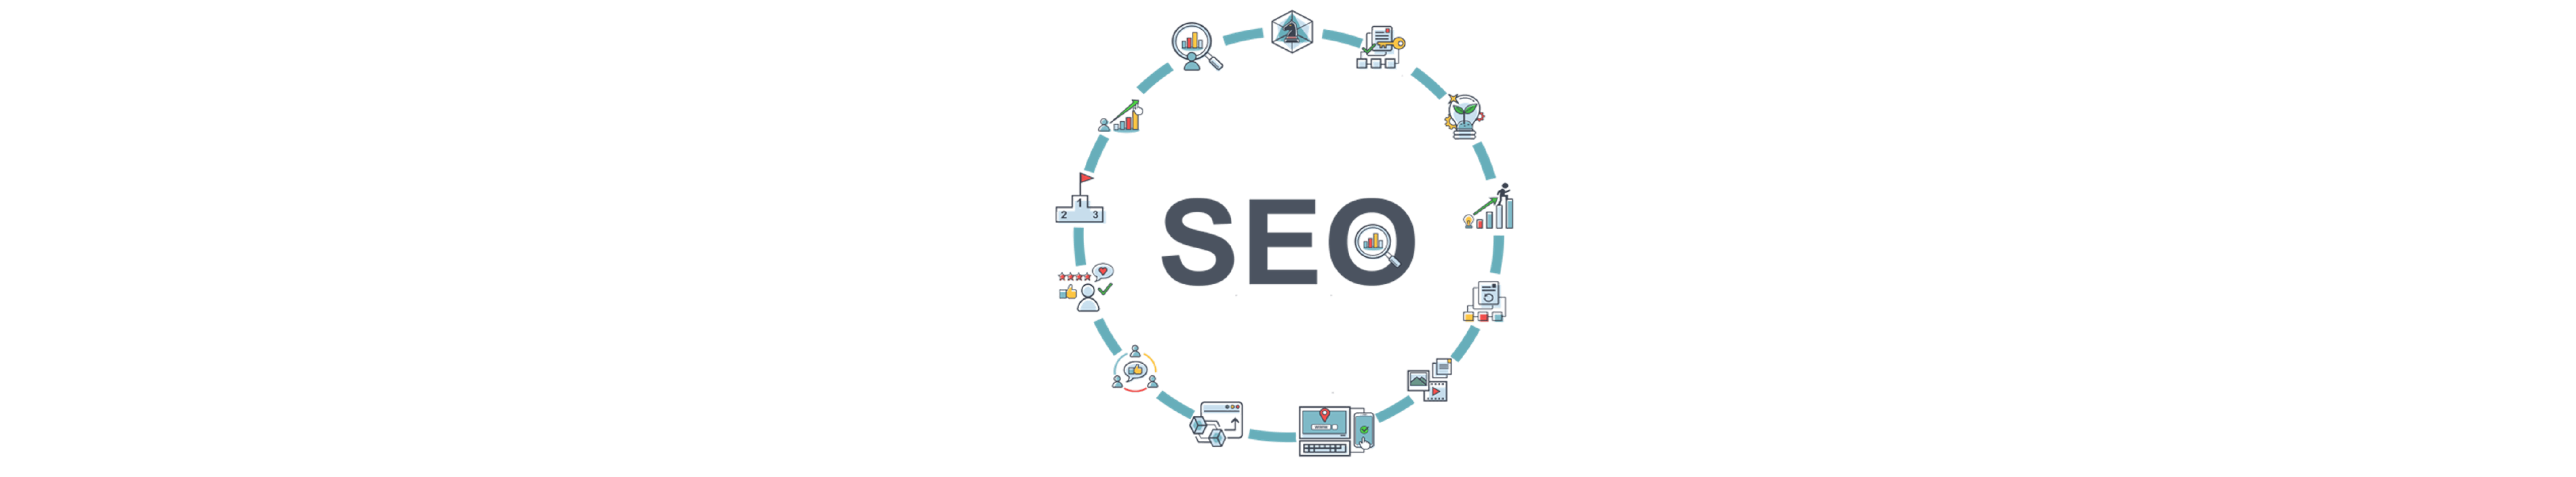 What is SEO? SEO Guide for 2021